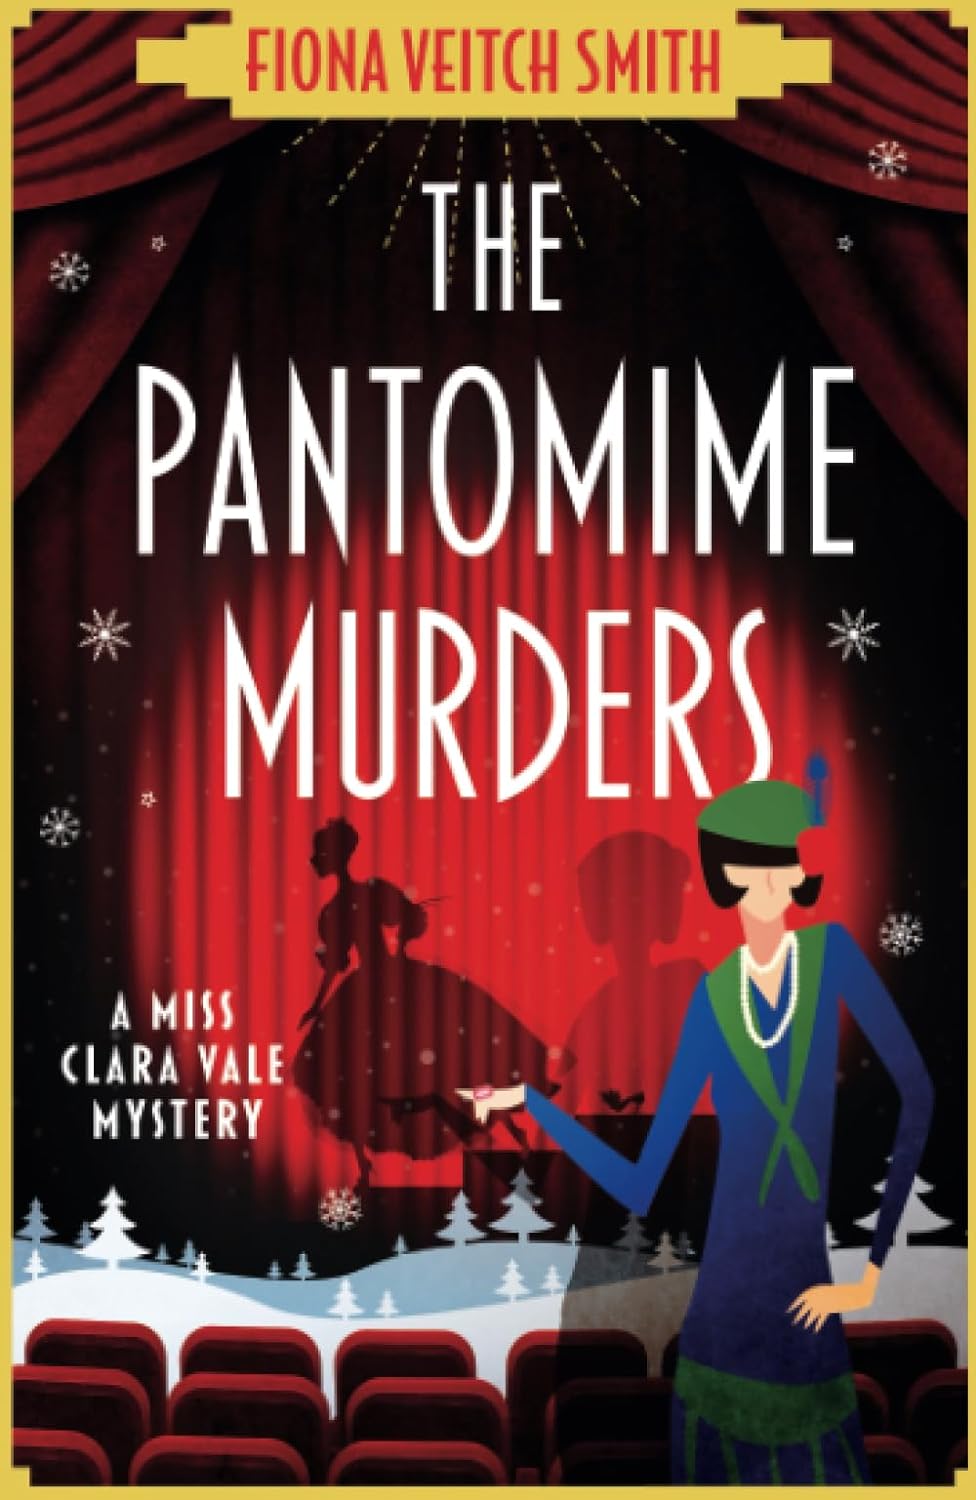 Fiona Veitch Smith: The Pantomime Murders (Paperback, Embla Books)